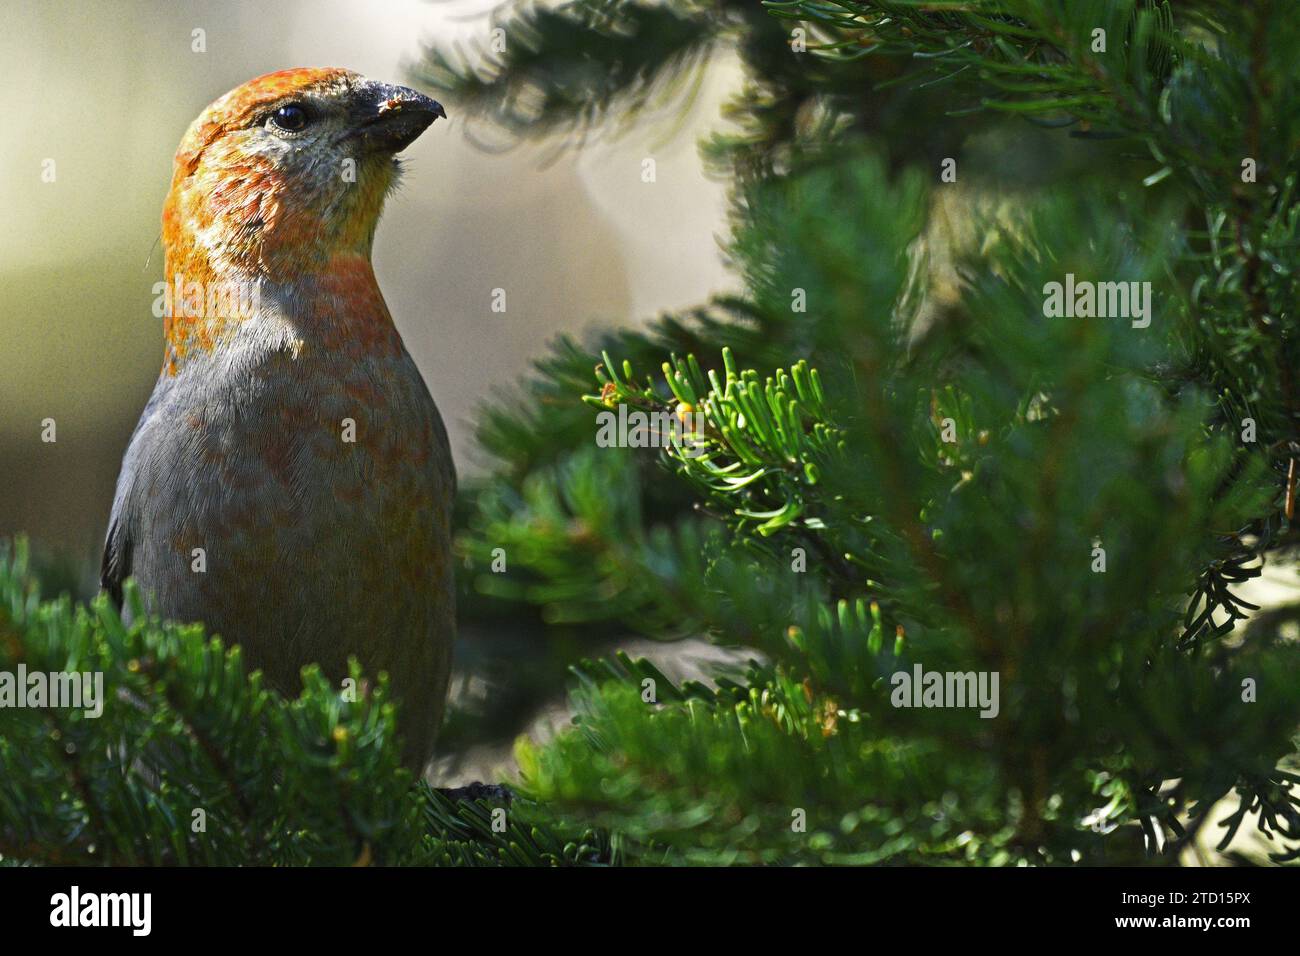 Pine Grosbeak (Pinicola enucleator) feeding on tree buds and needles in a spruce-fir forest in fall. Purcell Mountains, northwest Montana. Stock Photo